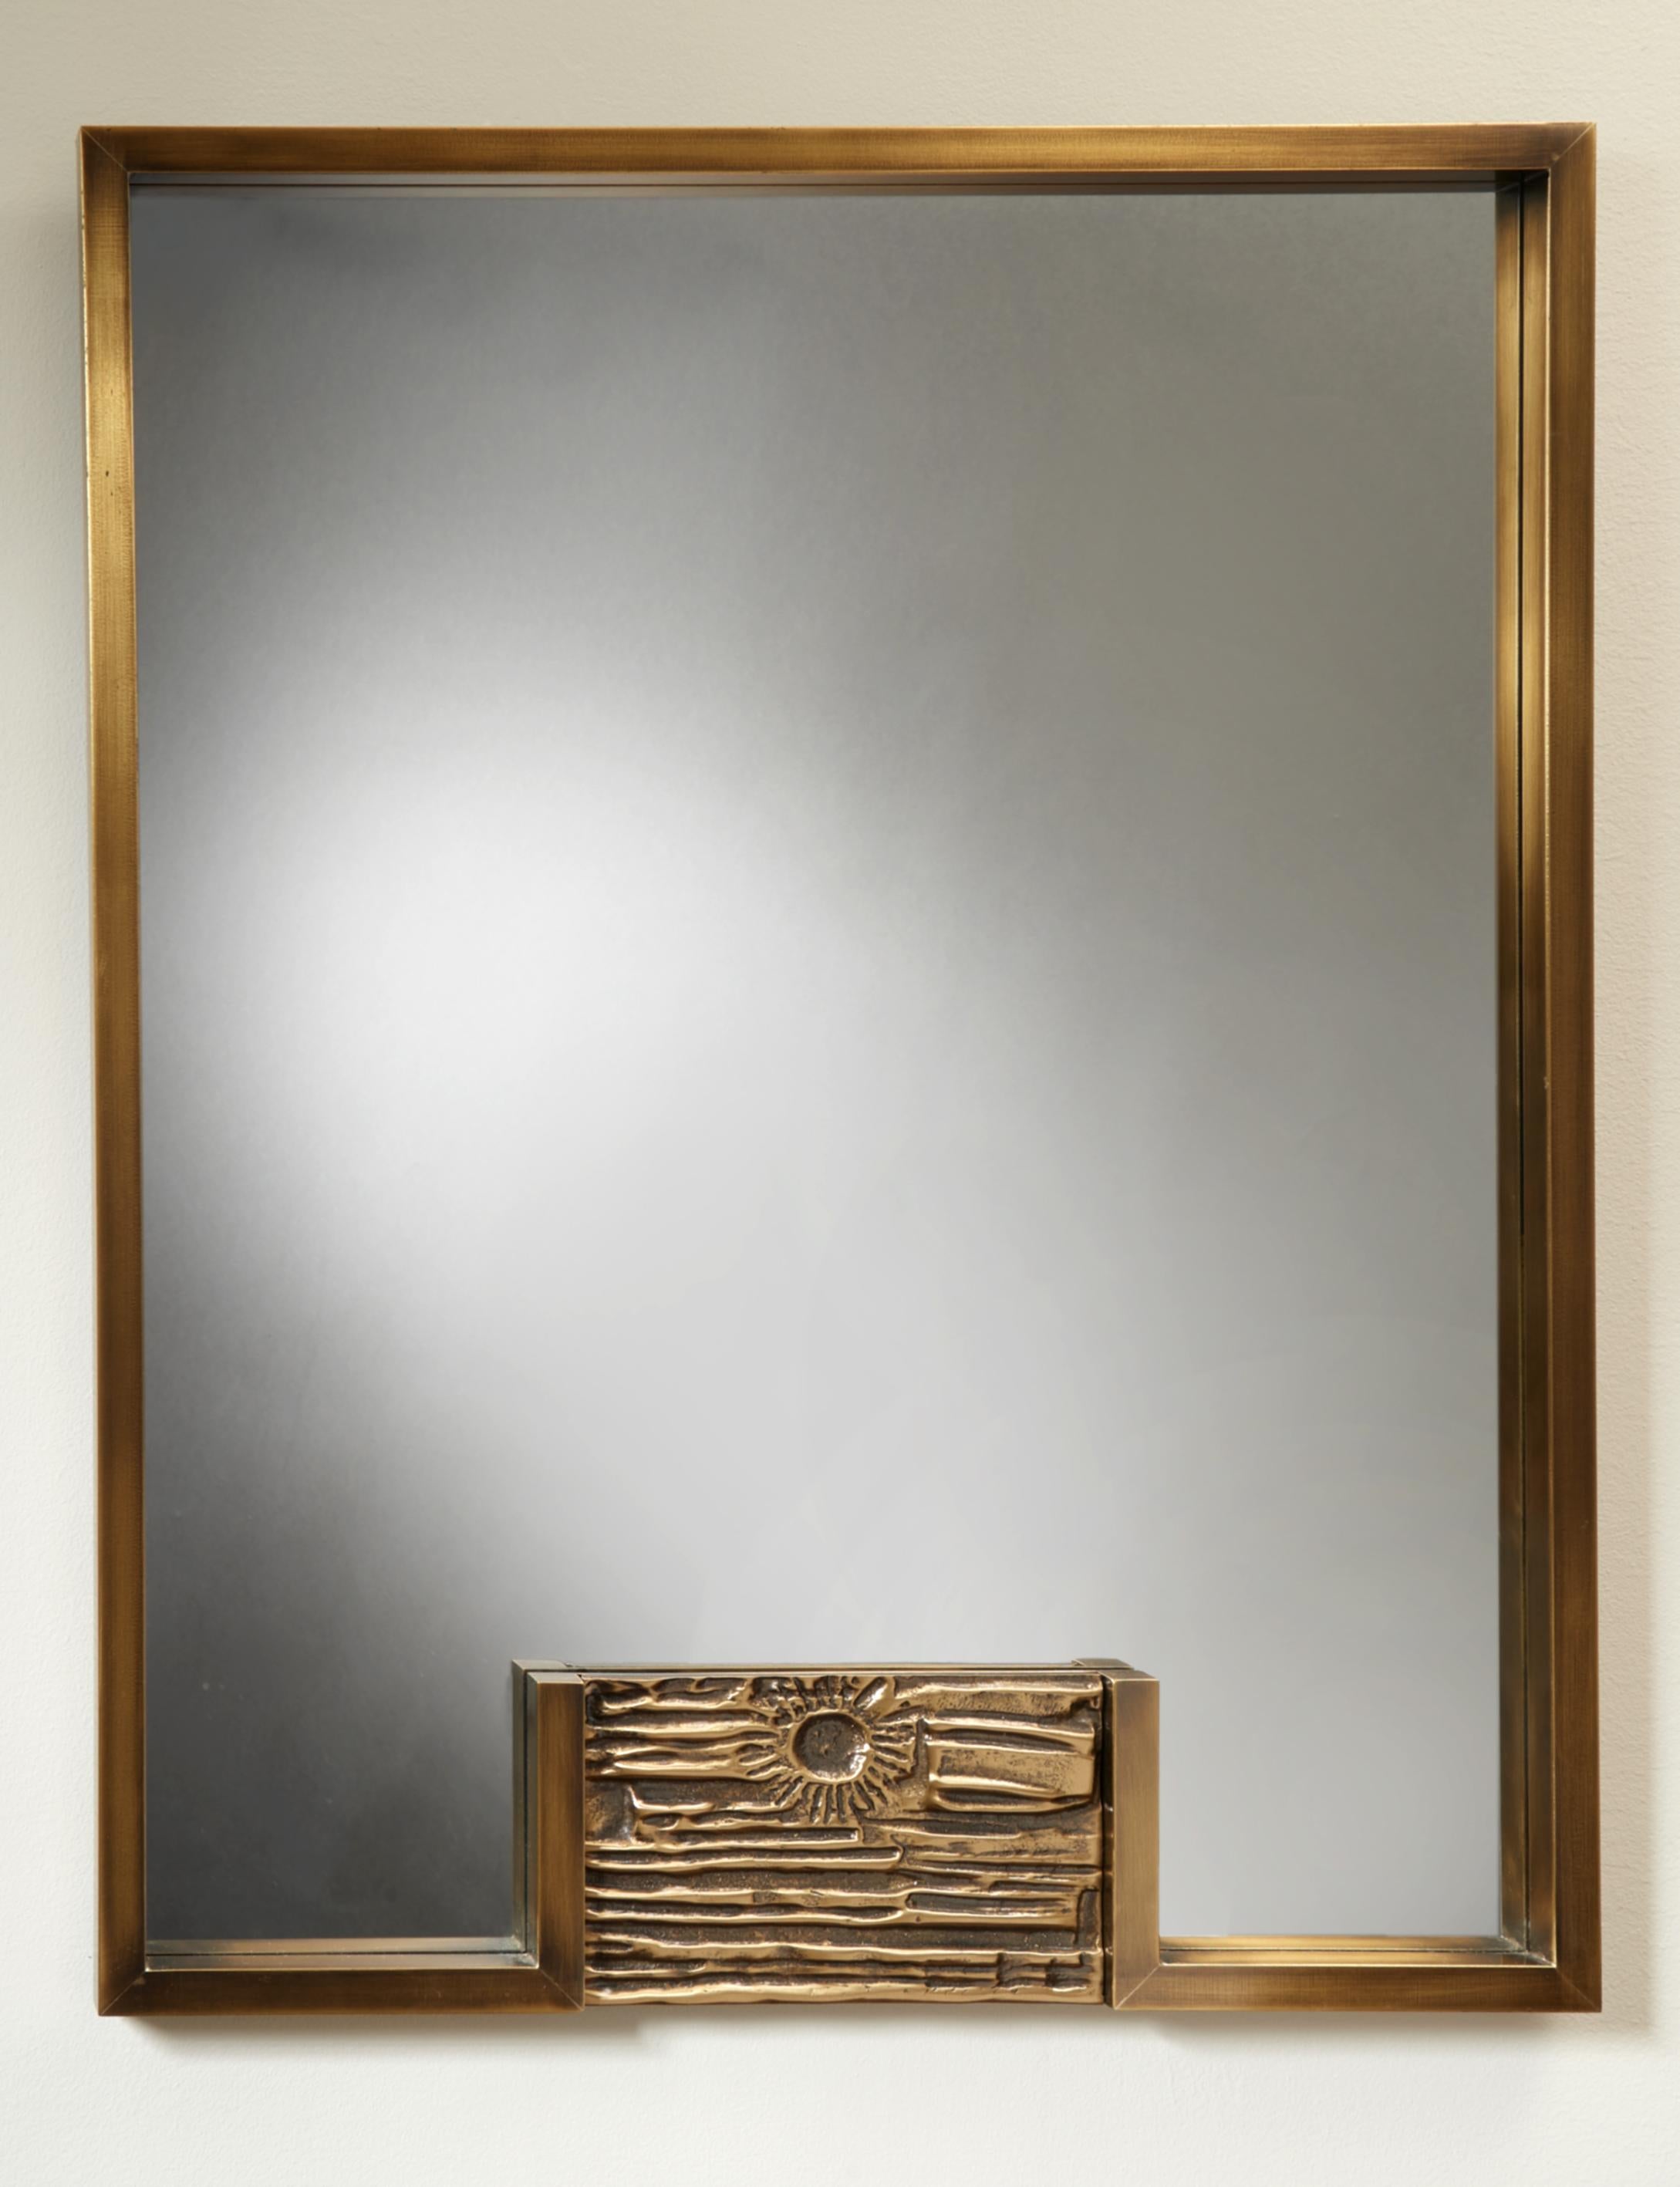 Luciano Friegerio (1928-1999)

A mirror in sculpted bronze by designer and artist Luciano Frigerio. A beautifully cast bas-relief depicting an abstracted sunrise grounds the rectangular frame. The piece represents a strong application of Frigerio's